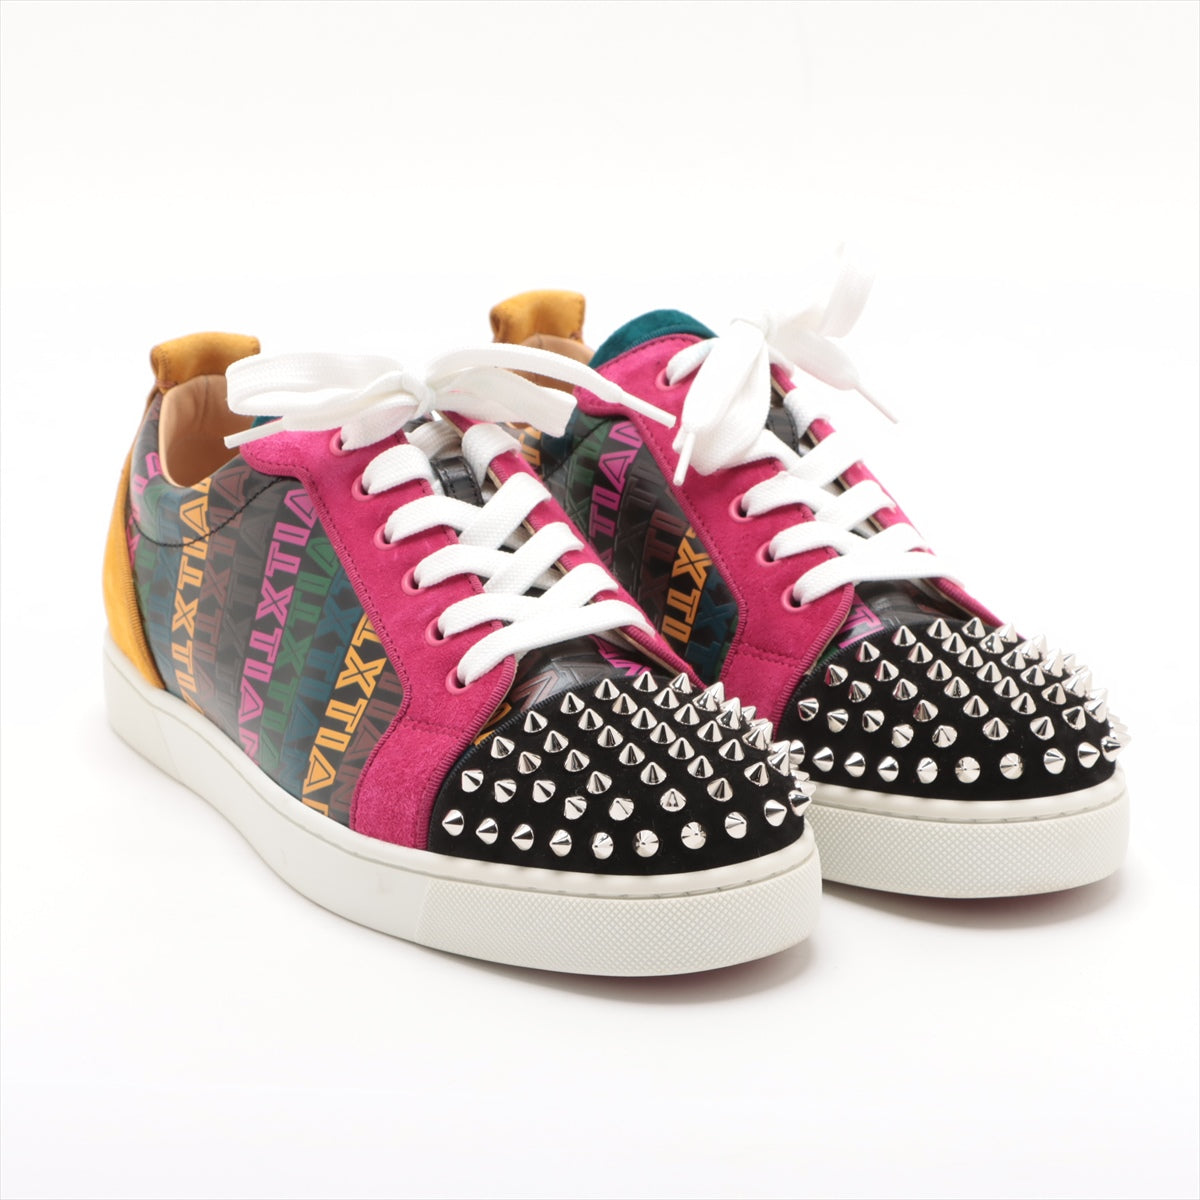 Christian Louboutin Leather & Suede Sneakers 42 1/2 Men's Multicolor LOUIS JUNIOR SPIKES ORLATO Spike Studs Is there a replacement string